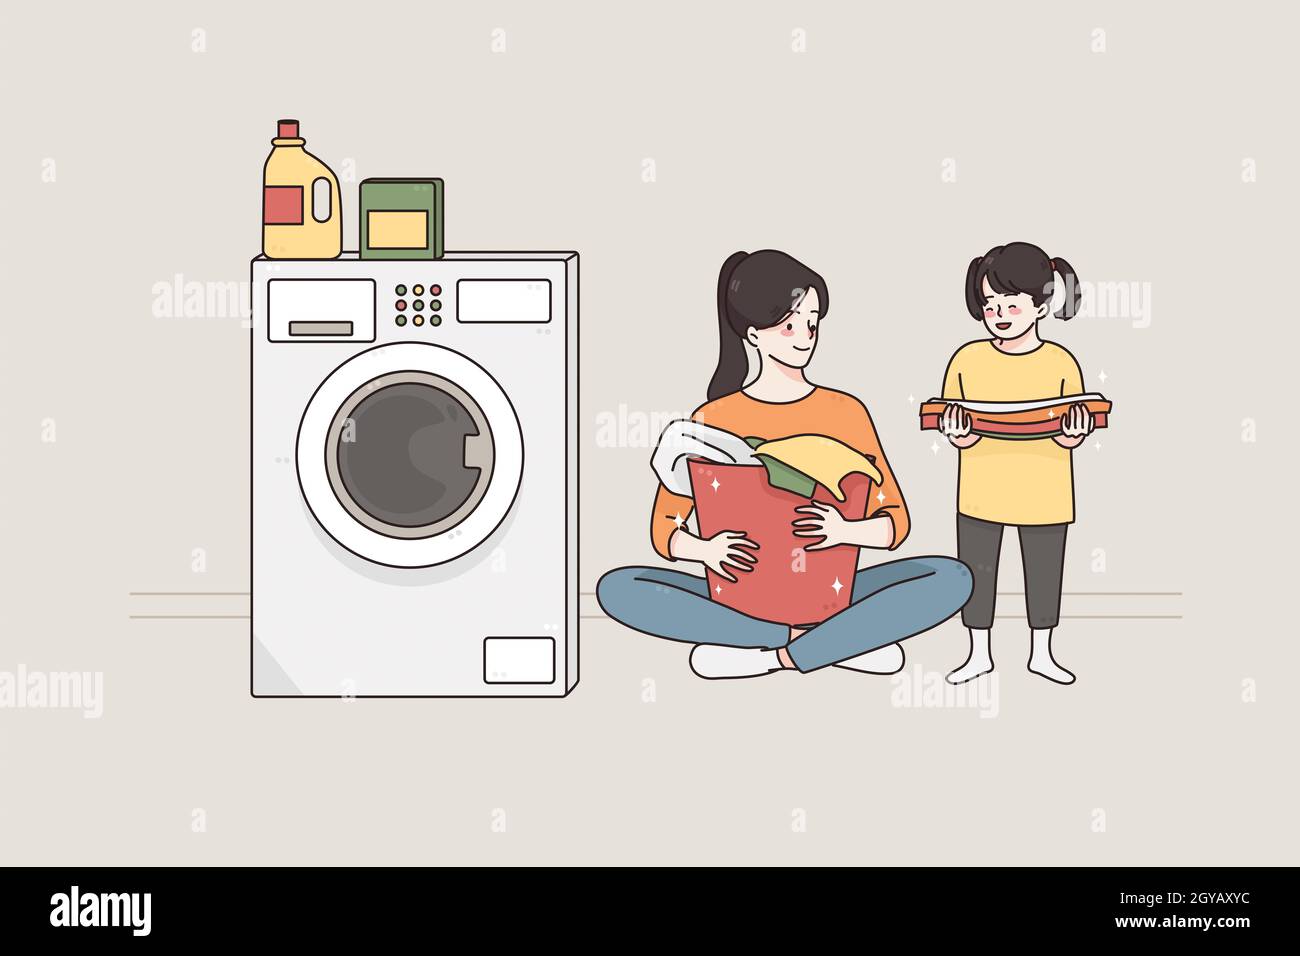 Laundry and spending time with children concept.Young smiling happy woman and her small daughter cartoon characters sitting on floor preparing dirty c Stock Photo